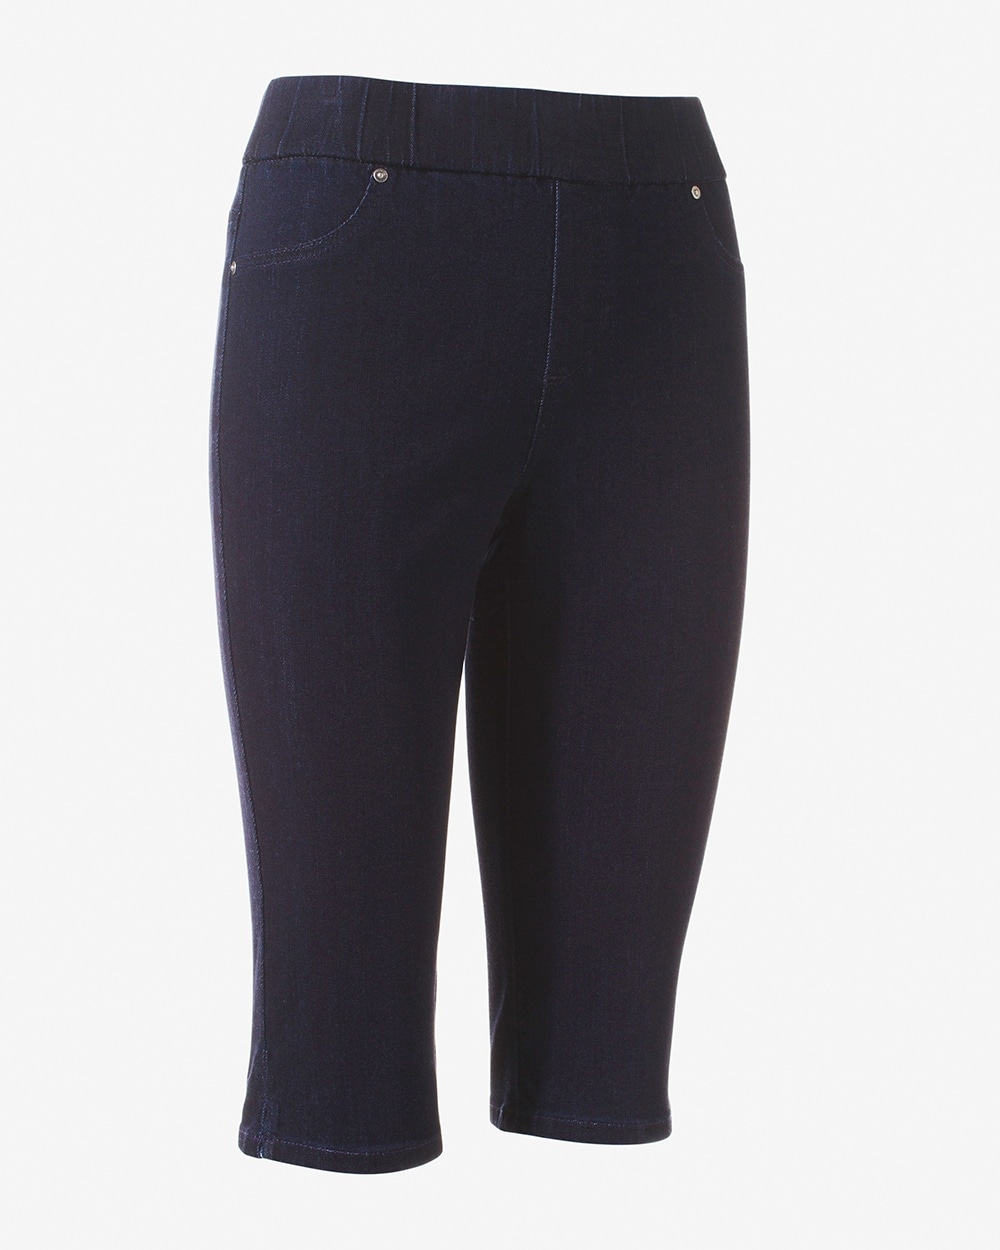 Perfect Stretch Soft Jegging Pedal Pushers